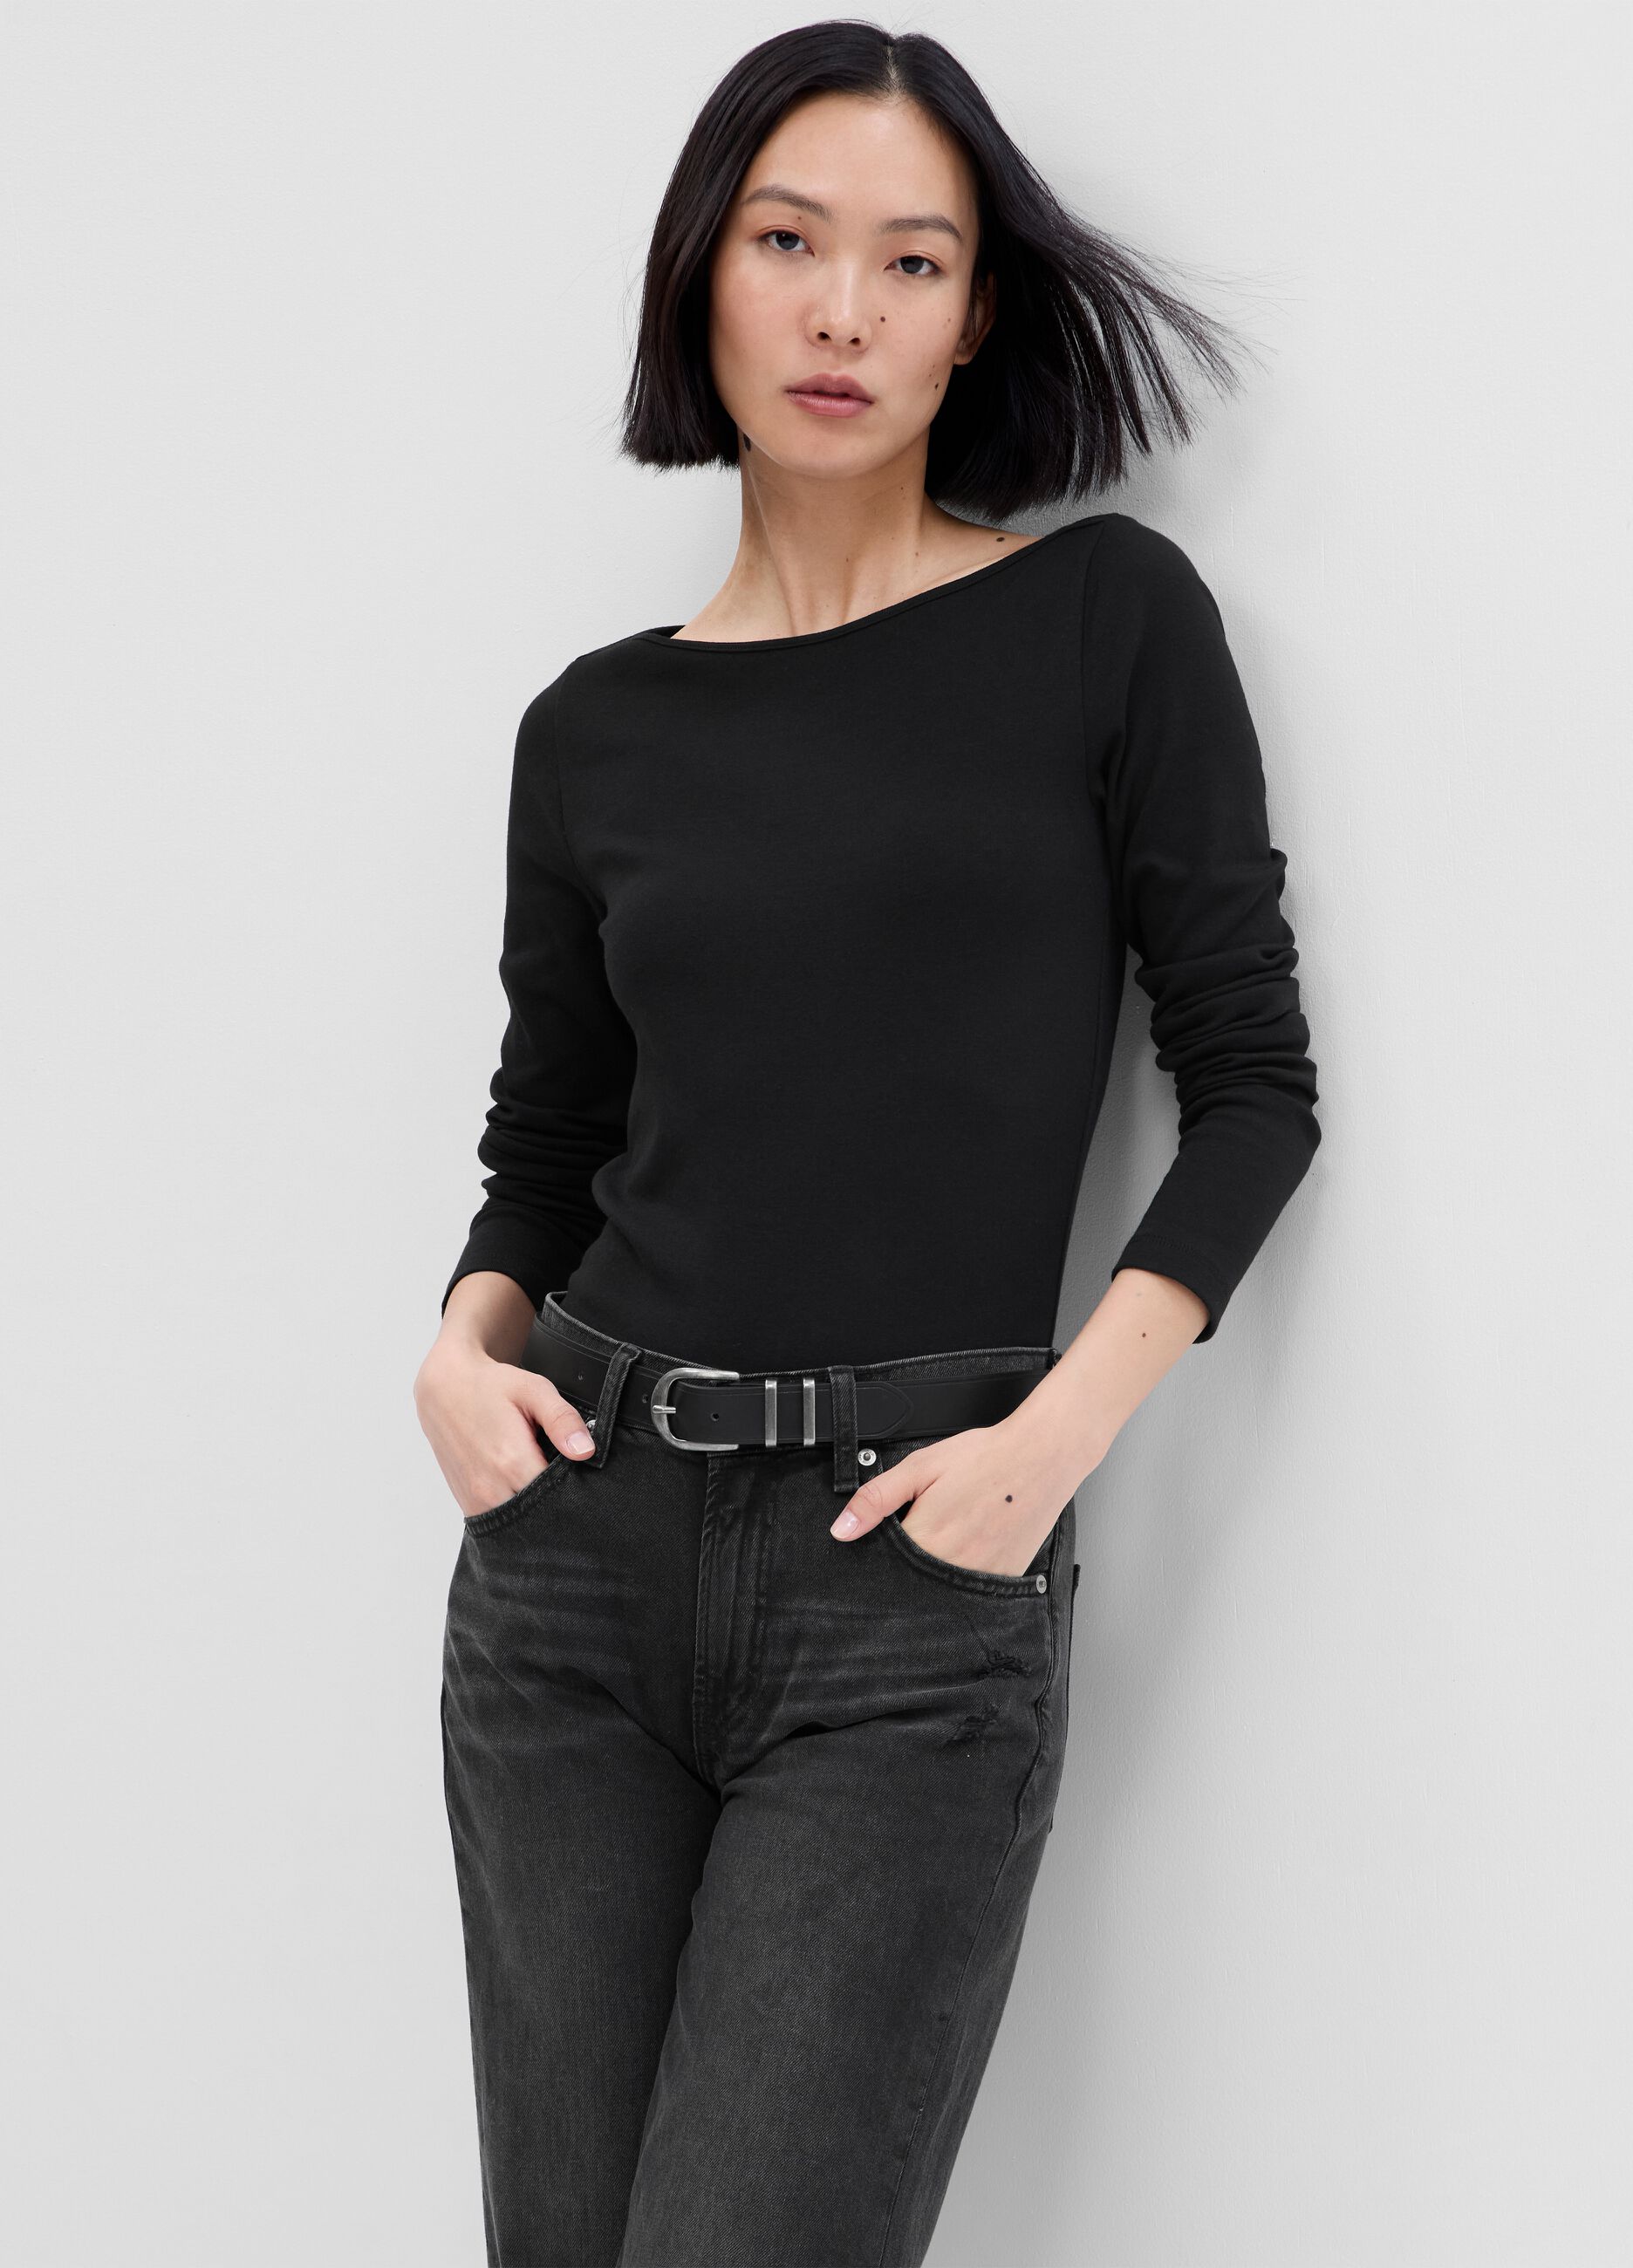 T-shirt in cotton and modal with boat neck